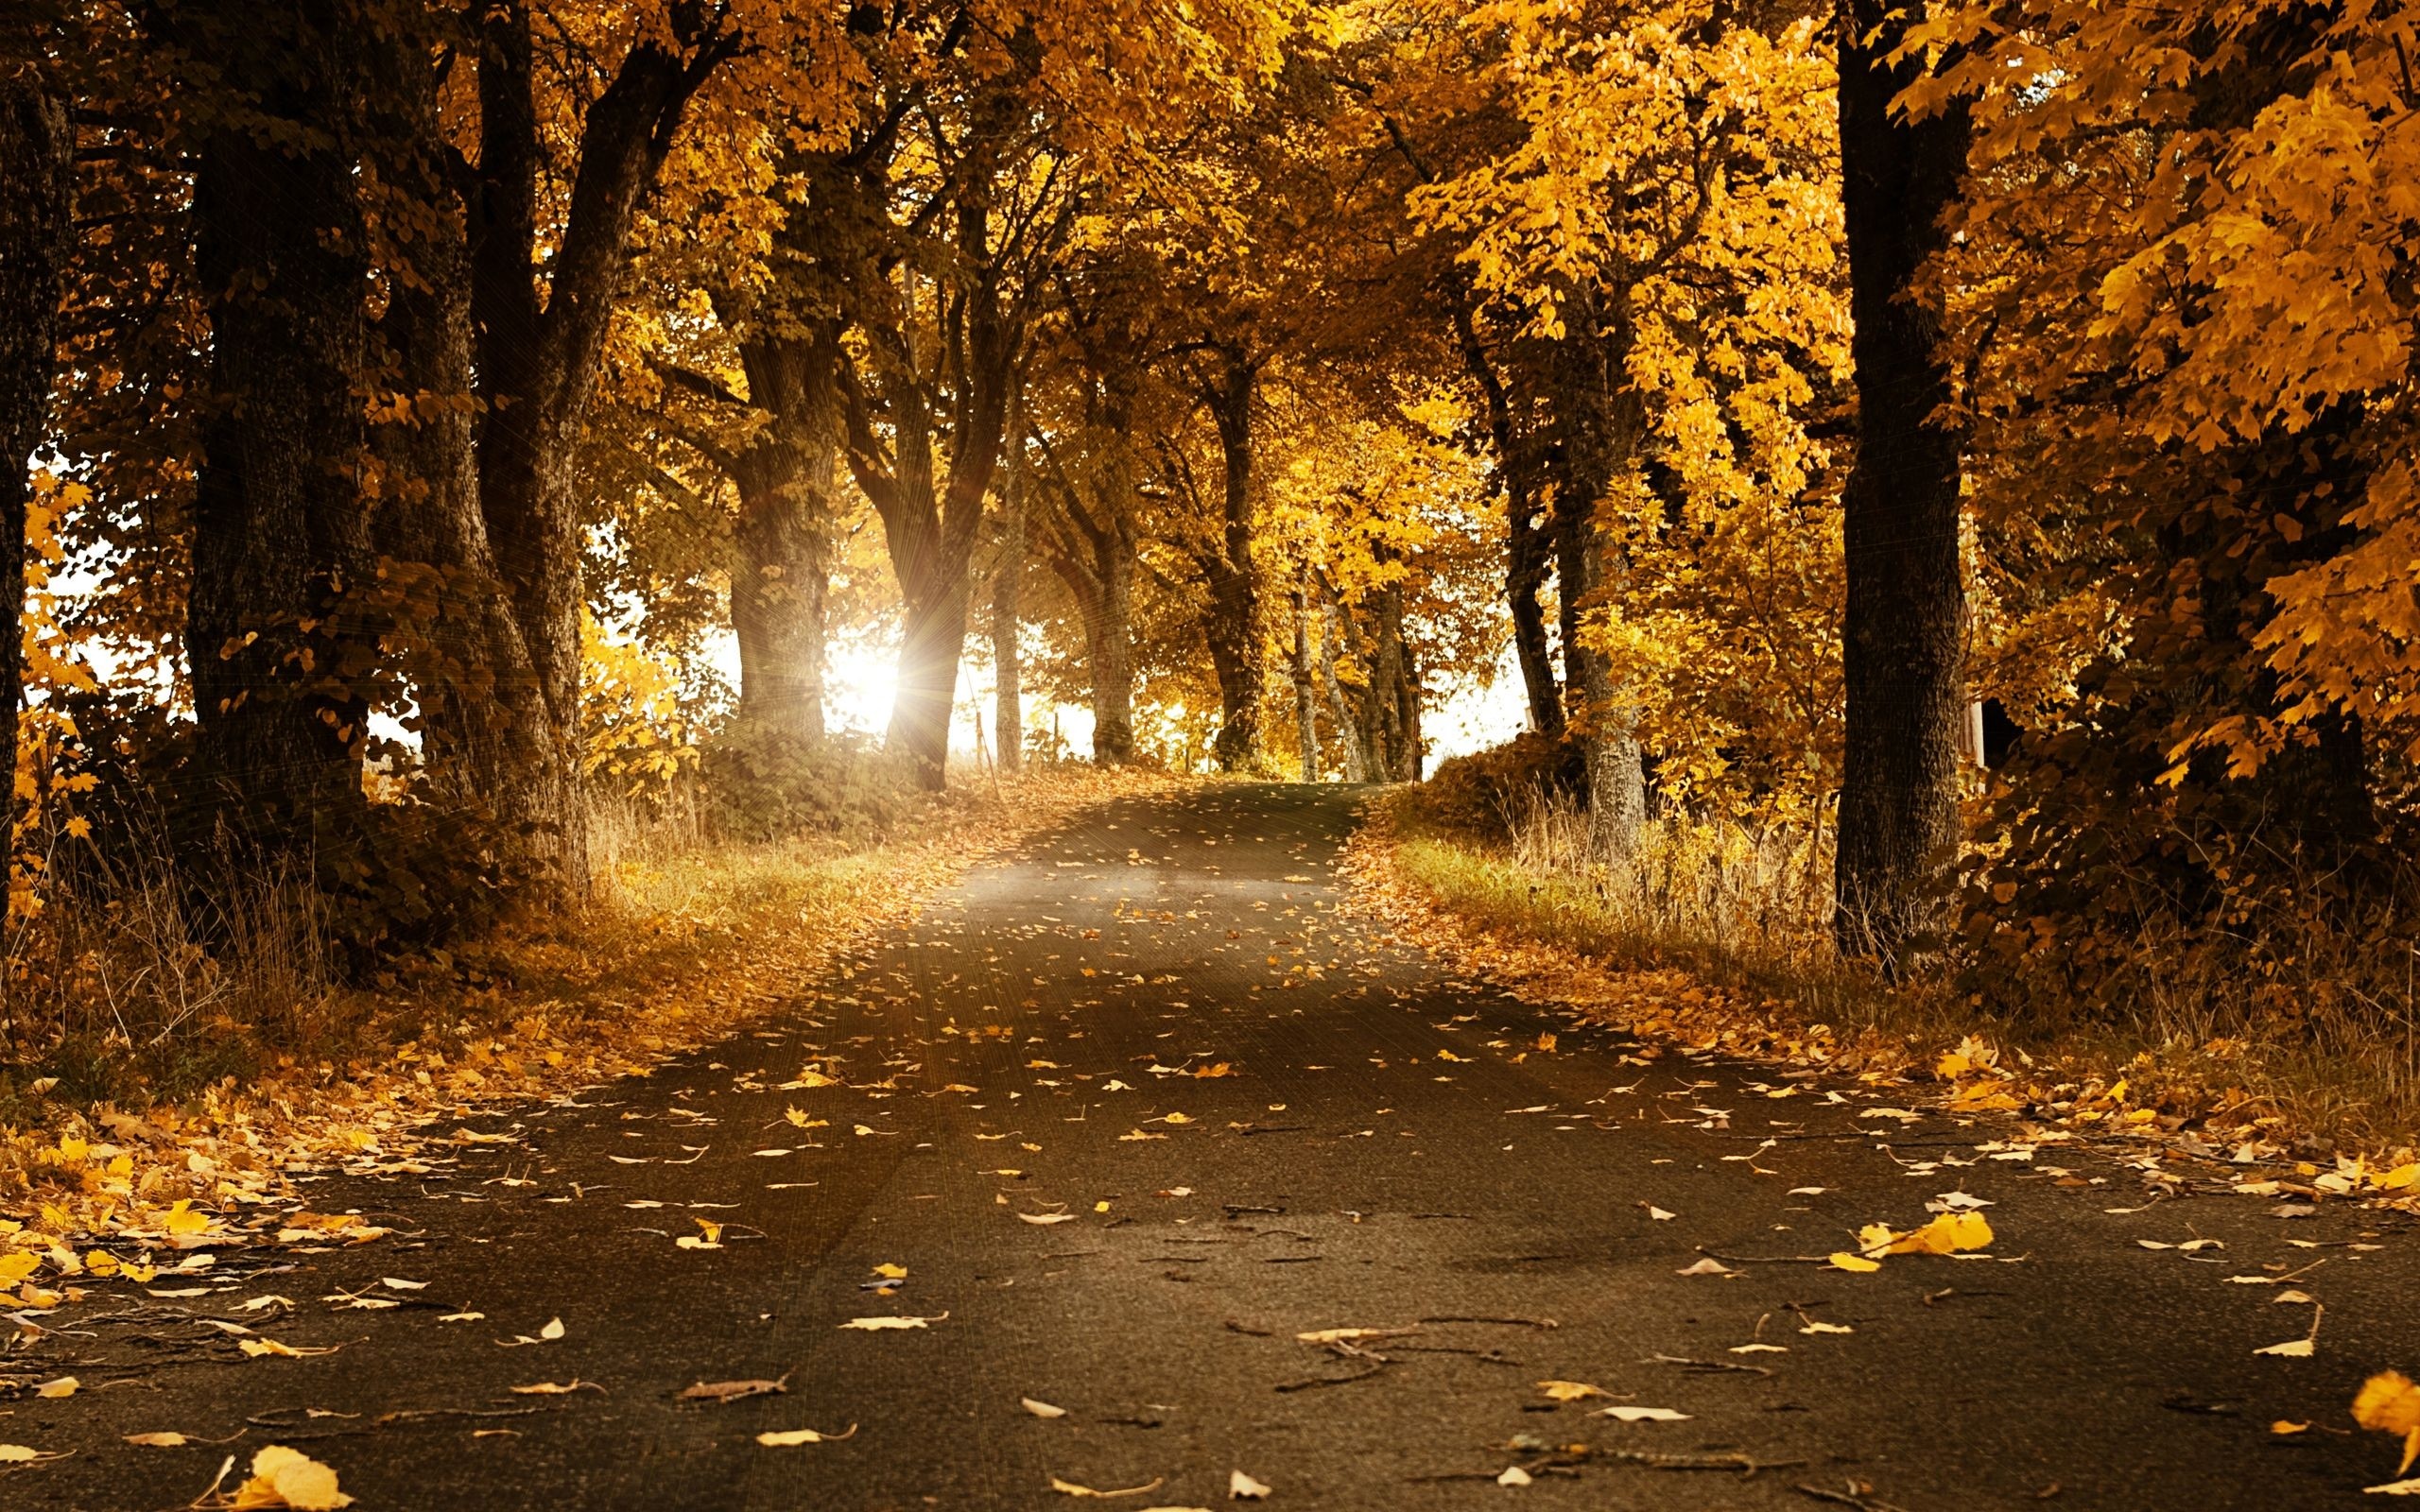 General 2560x1600 forest street fall road yellow path fallen leaves trees leaves plants